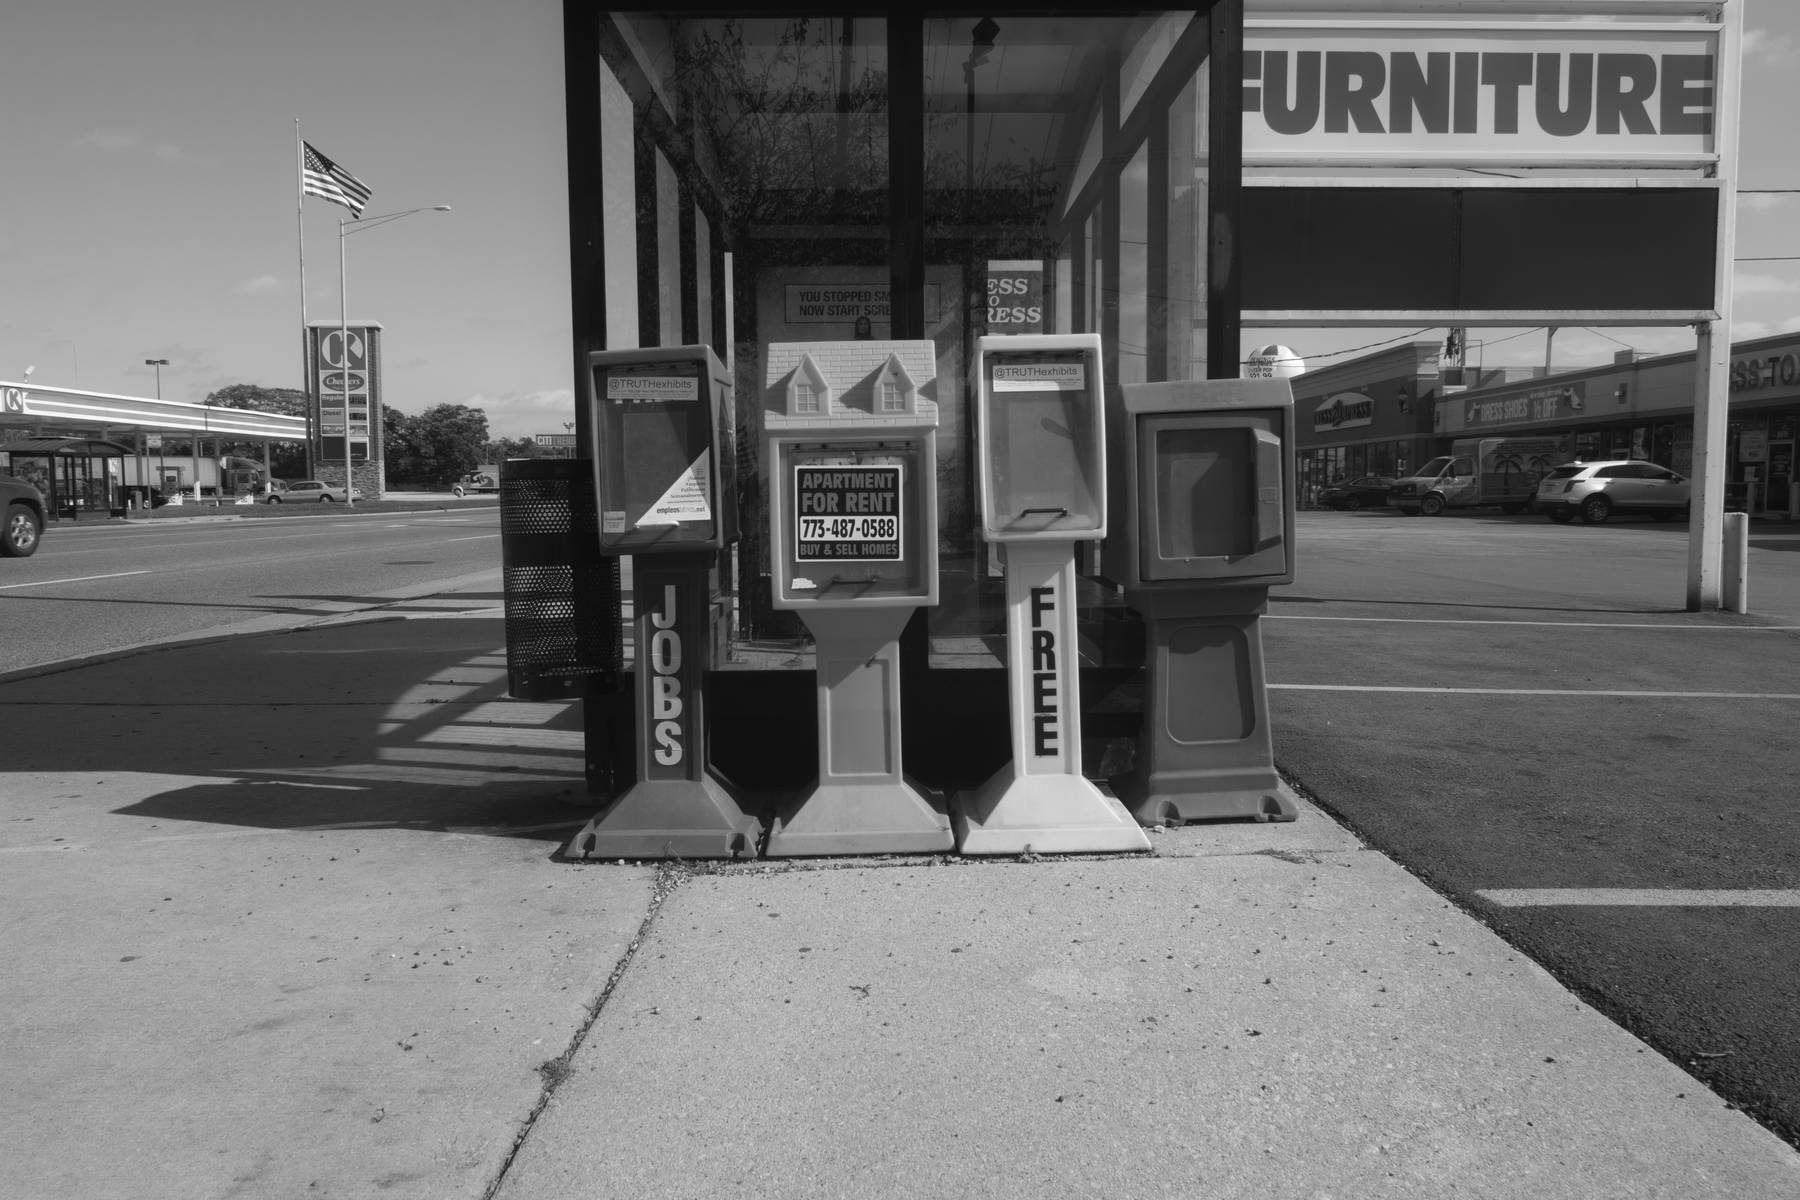 On Sibley Boulevard, Dolton’s main commercial strip, newstands that once offered job and housing information sit empty, replaced with “For Rent” signs. Deindustrialization throughout the south suburbs decades ago eliminated thousands of private-sector jobs.